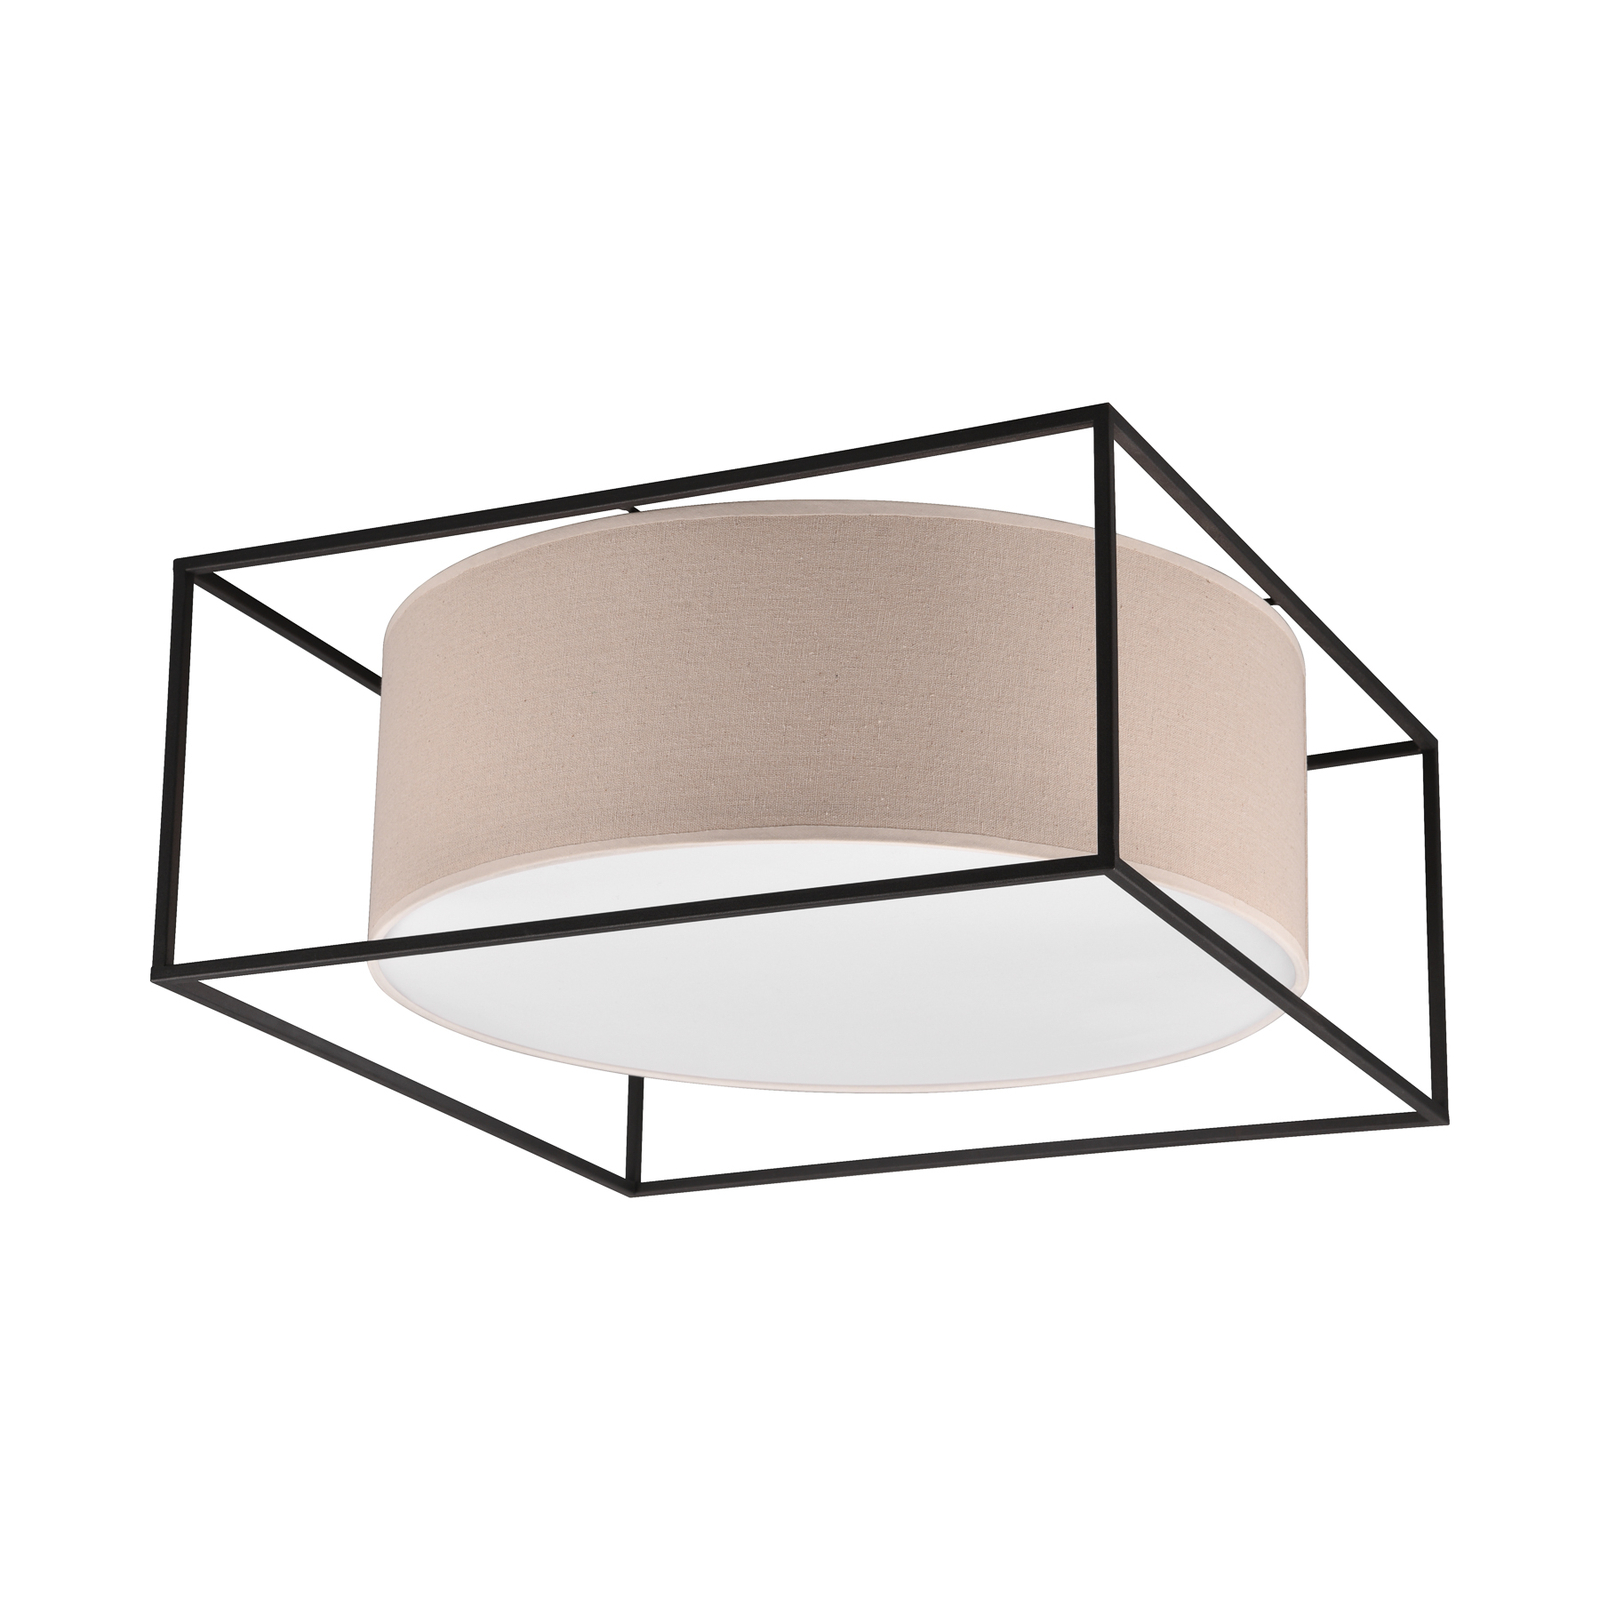 Ross ceiling light with fabric shade, 50 x 50 cm